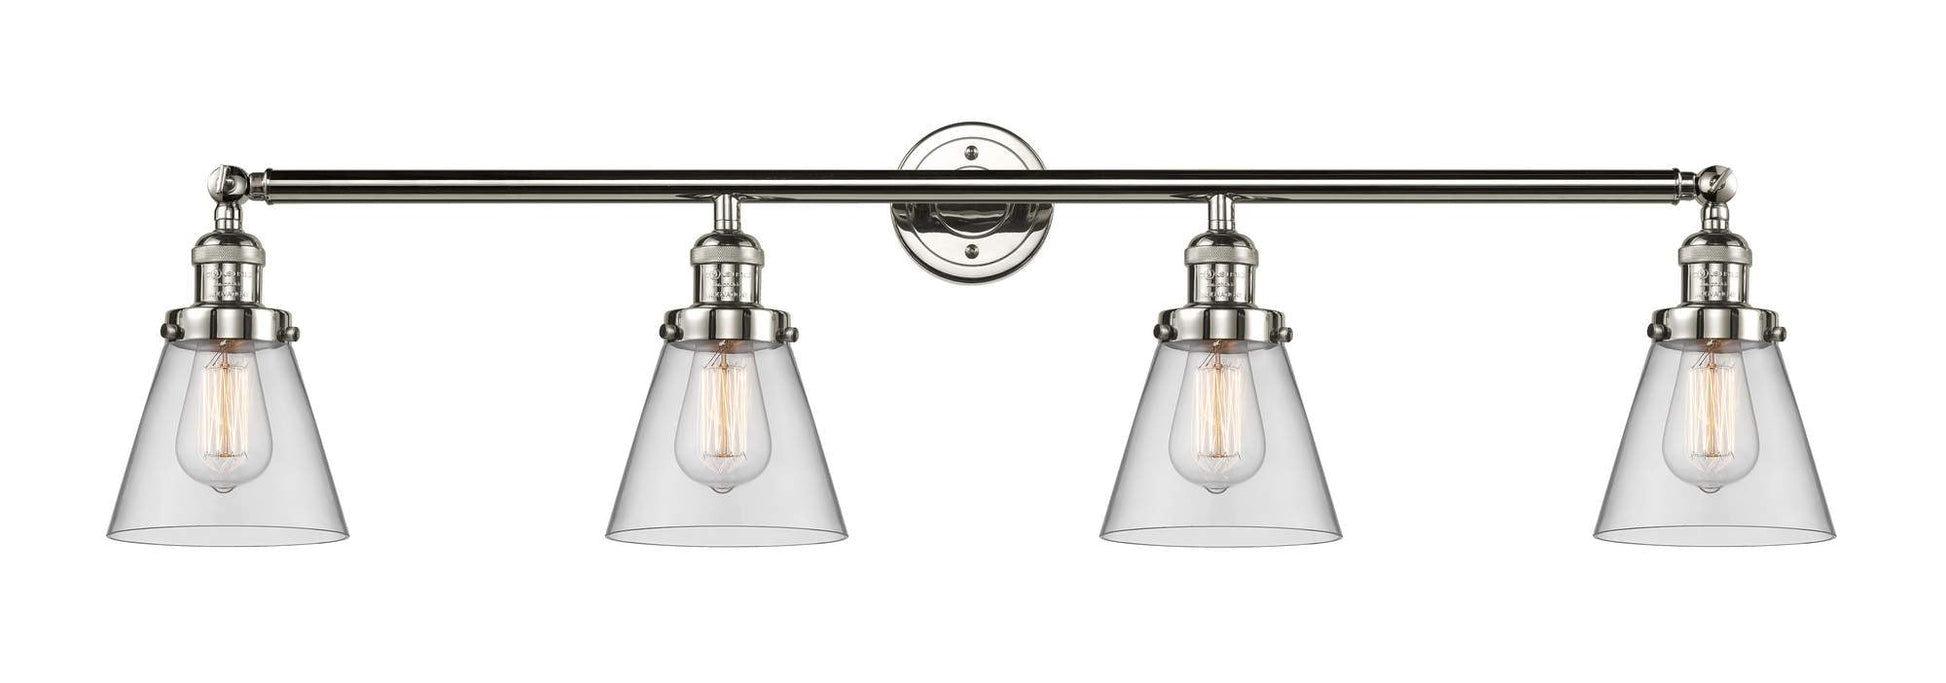 215-PN-G62 4-Light 42.25" Polished Nickel Bath Vanity Light - Clear Small Cone Glass - LED Bulb - Dimmensions: 42.25 x 7.625 x 9.75 - Glass Up or Down: Yes